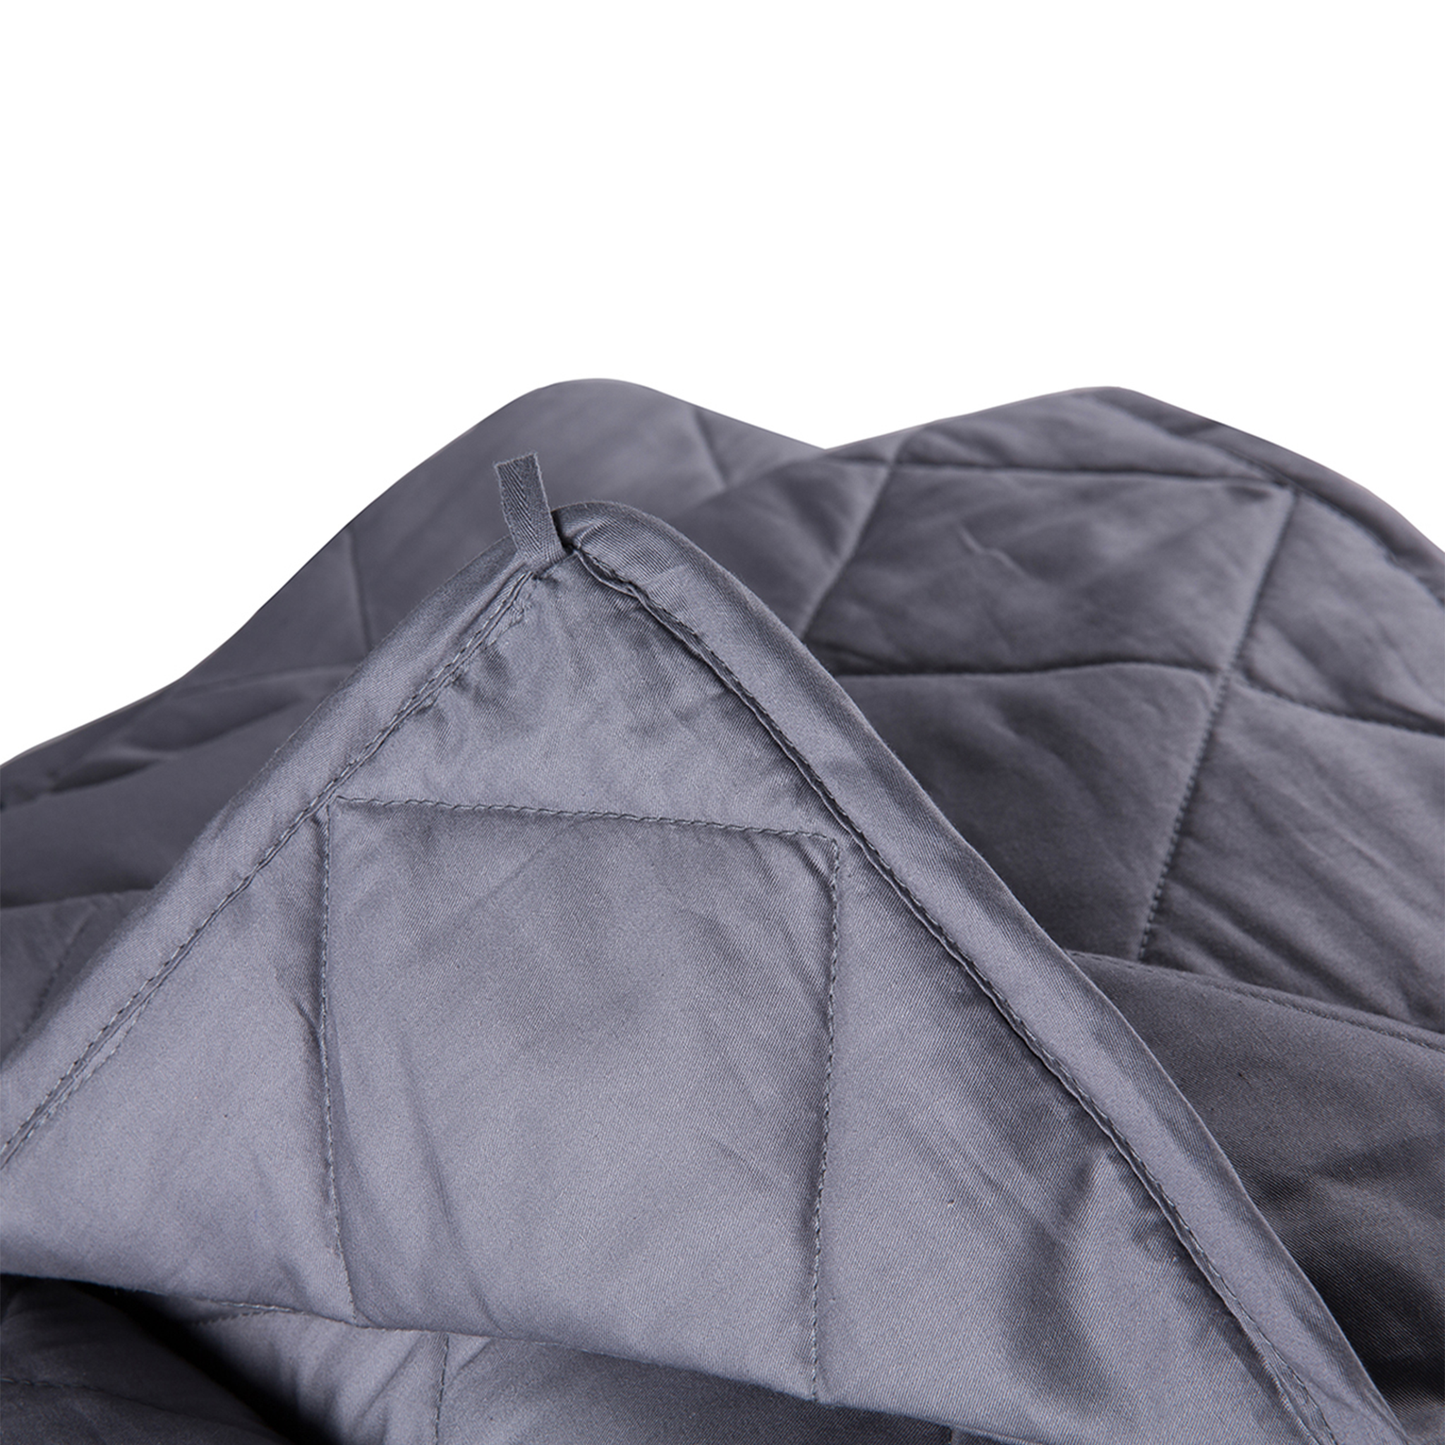 2 for P8,000 Weighted Blanket w/o Cover (15 lbs)